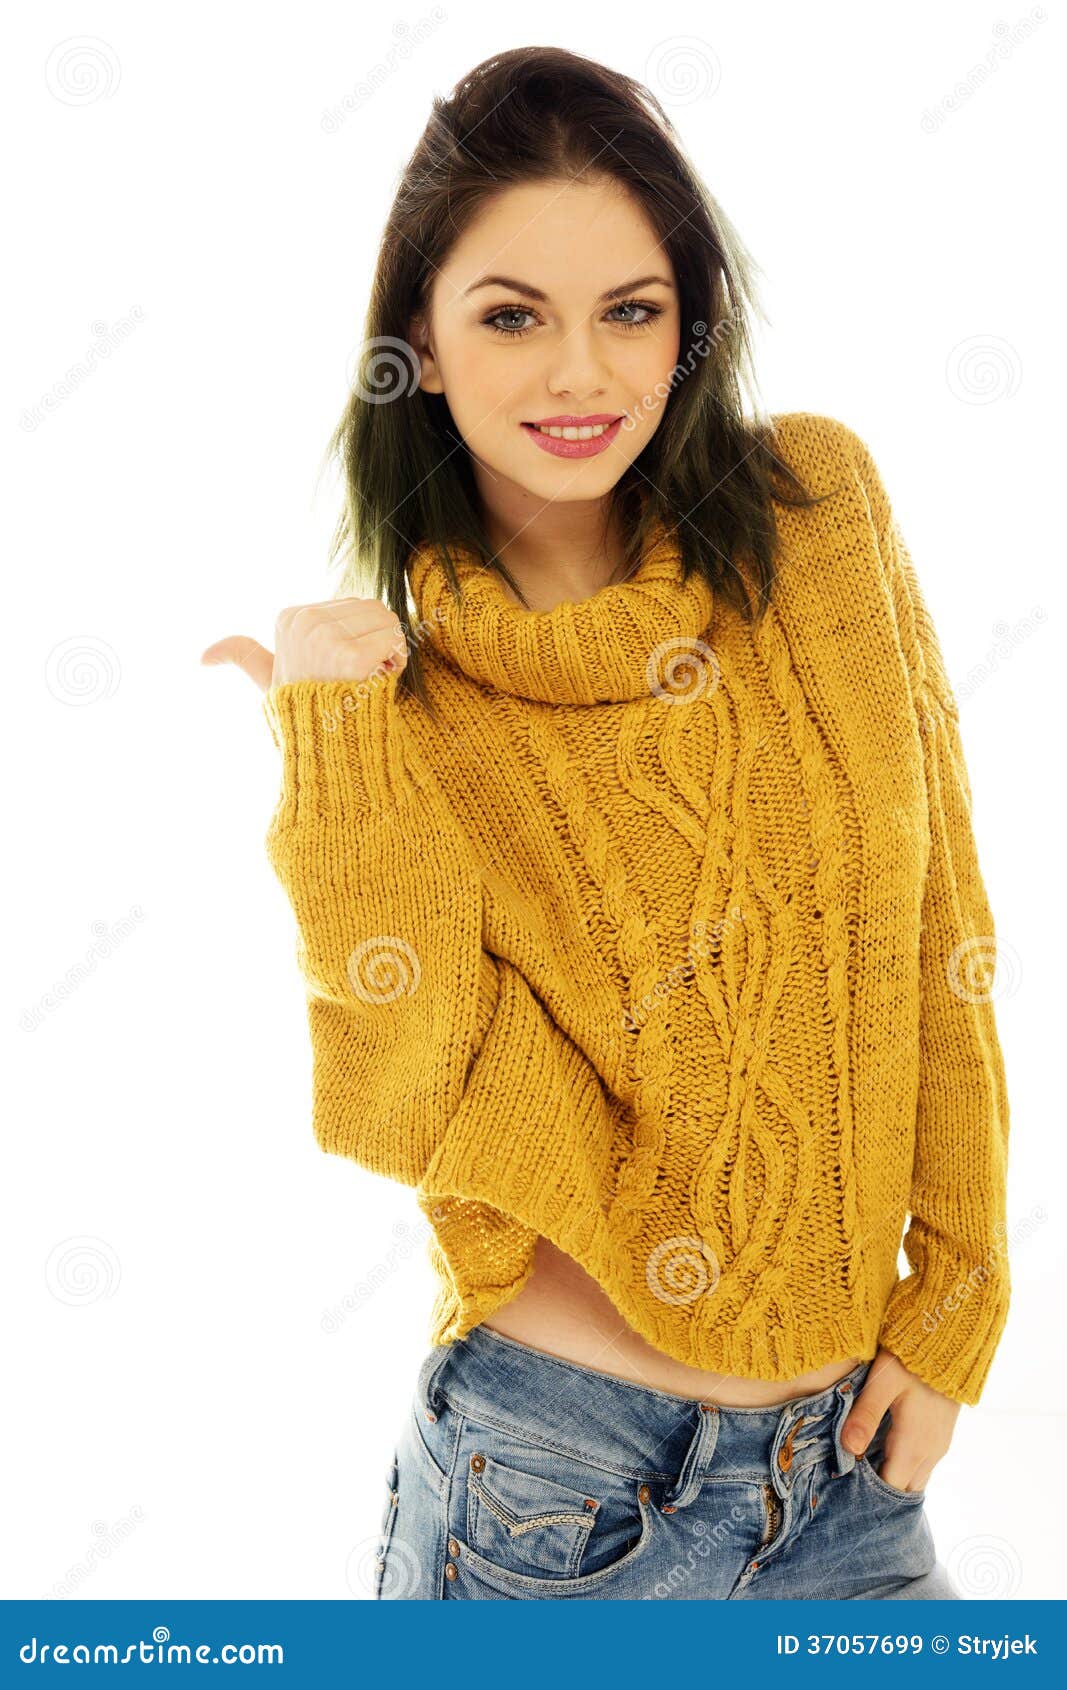 Trendy Young Woman Giving a Thumbs Up Stock Image - Image of relaxed ...